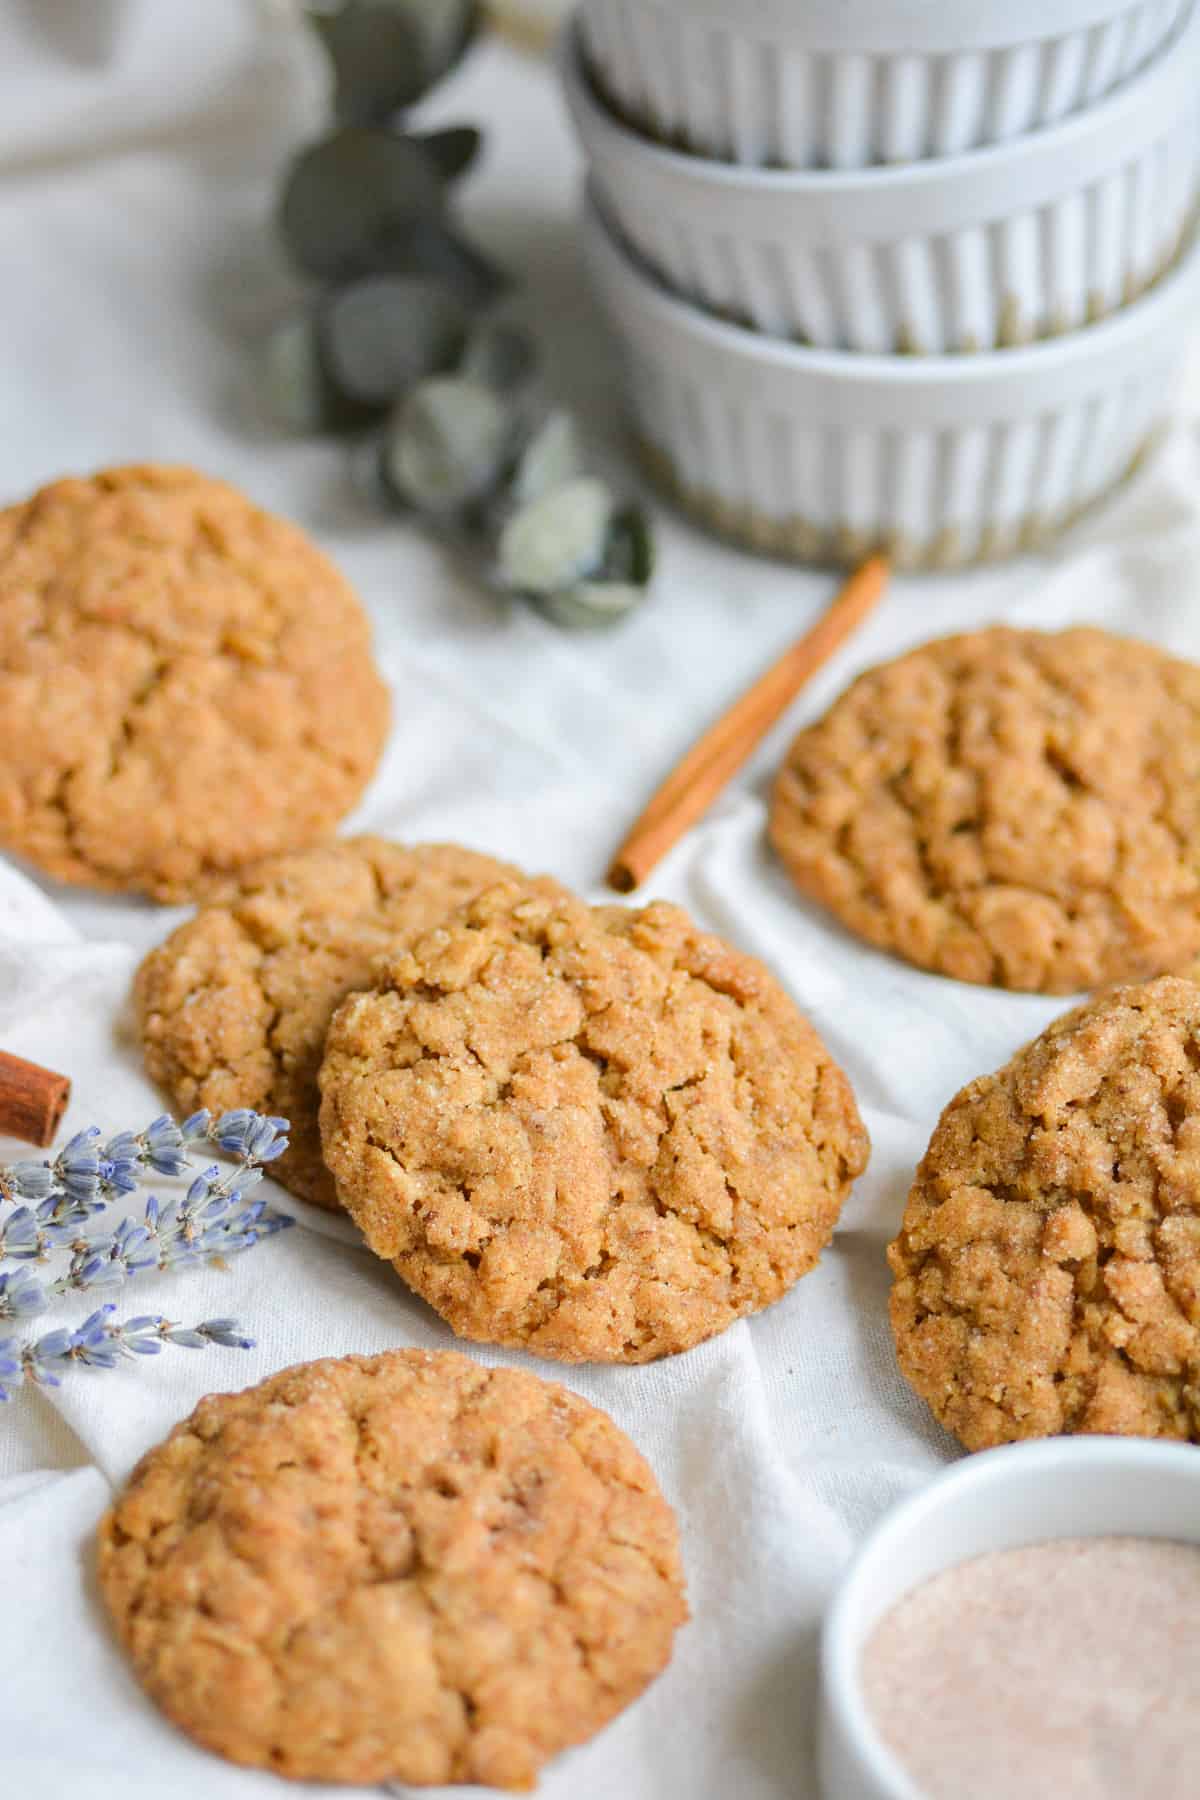 Oatmeal Snickerdoodle cookies on a white cloth with lavender flowers and cinnamon sticks around the scene.